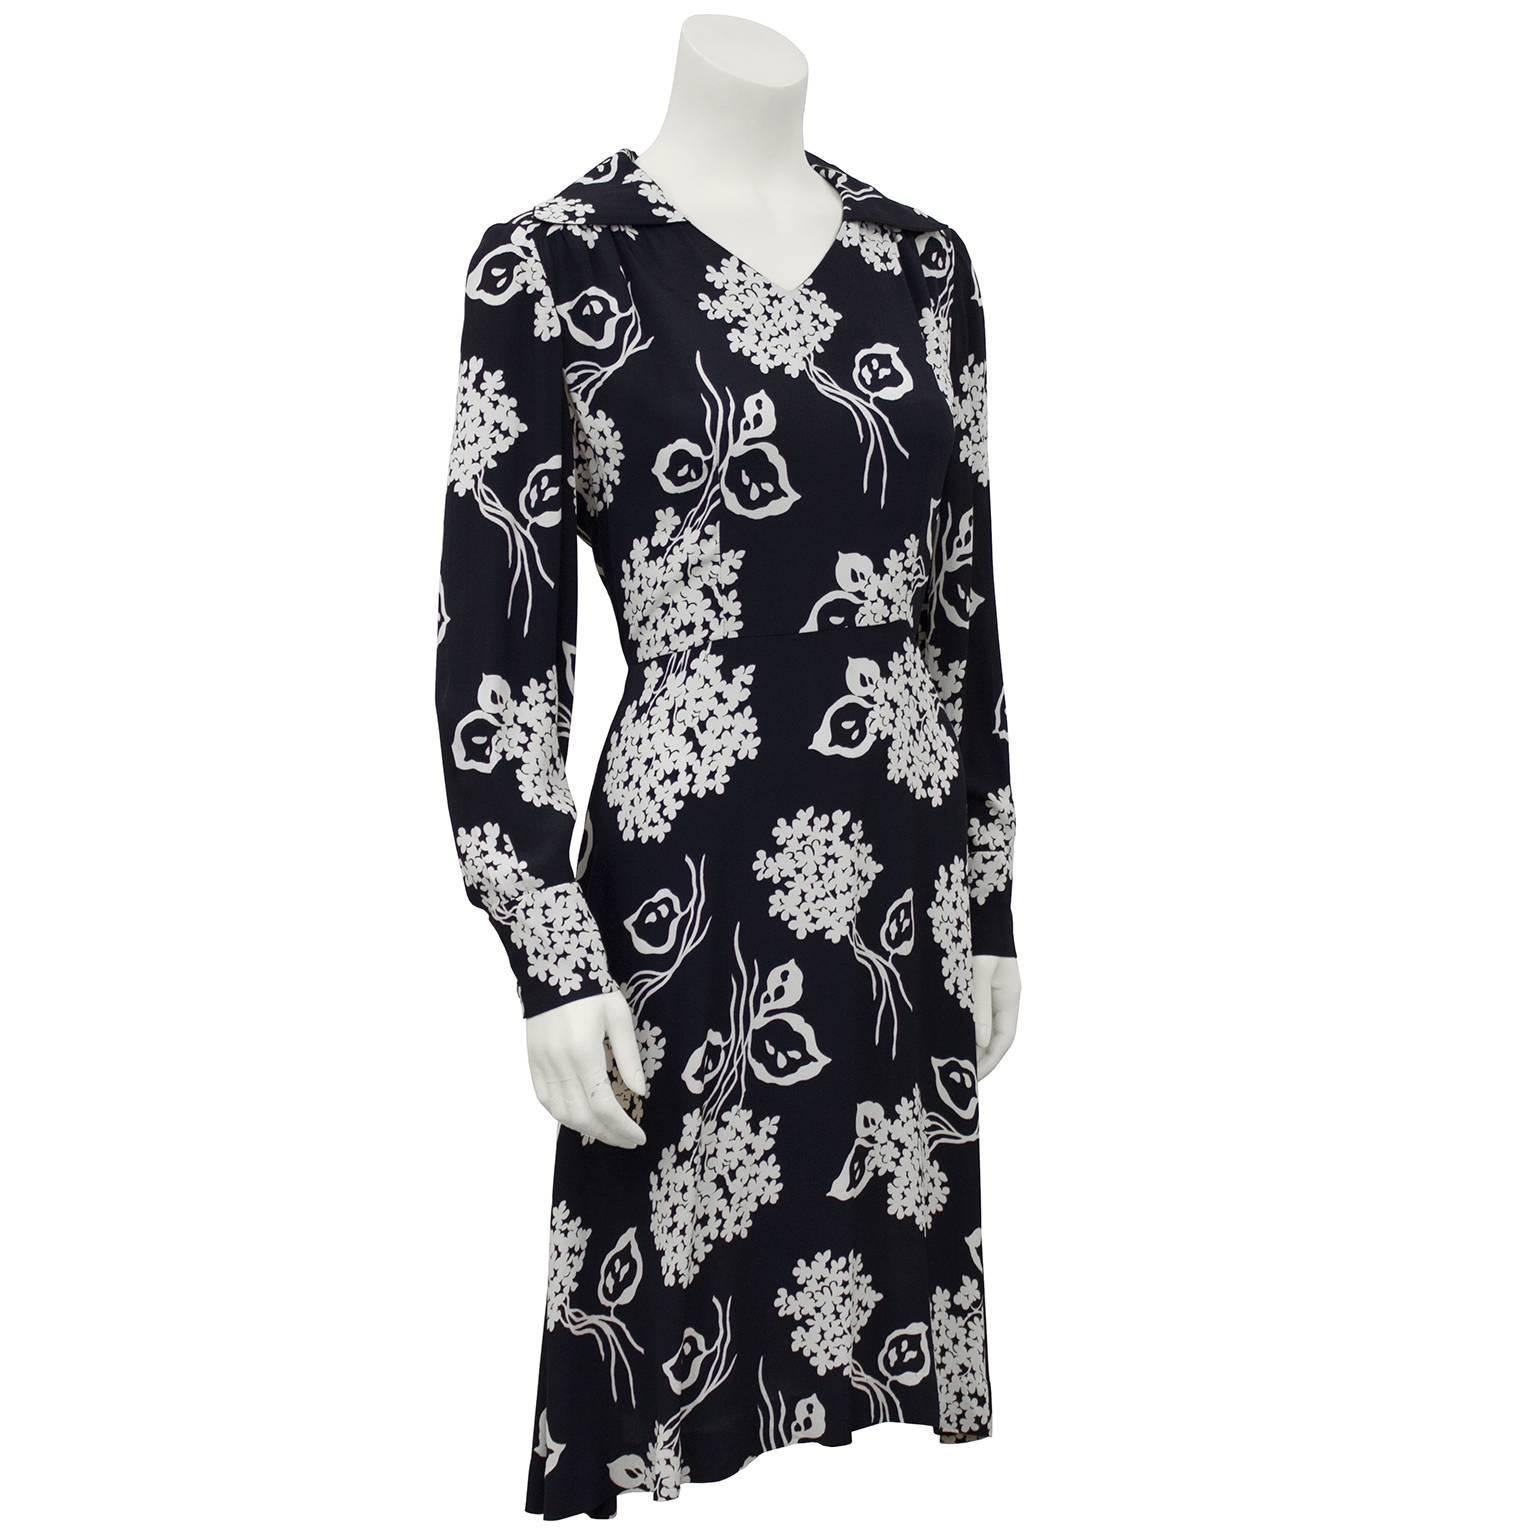 Black and cream floral printed rayon dress dating from the 1940s. Tiny feminine V neck with a collar and long sleeves. Very wearable today with a pair of white sneakers. Beautiful fabric, excellent vintage condition. Very on trend lady-like for